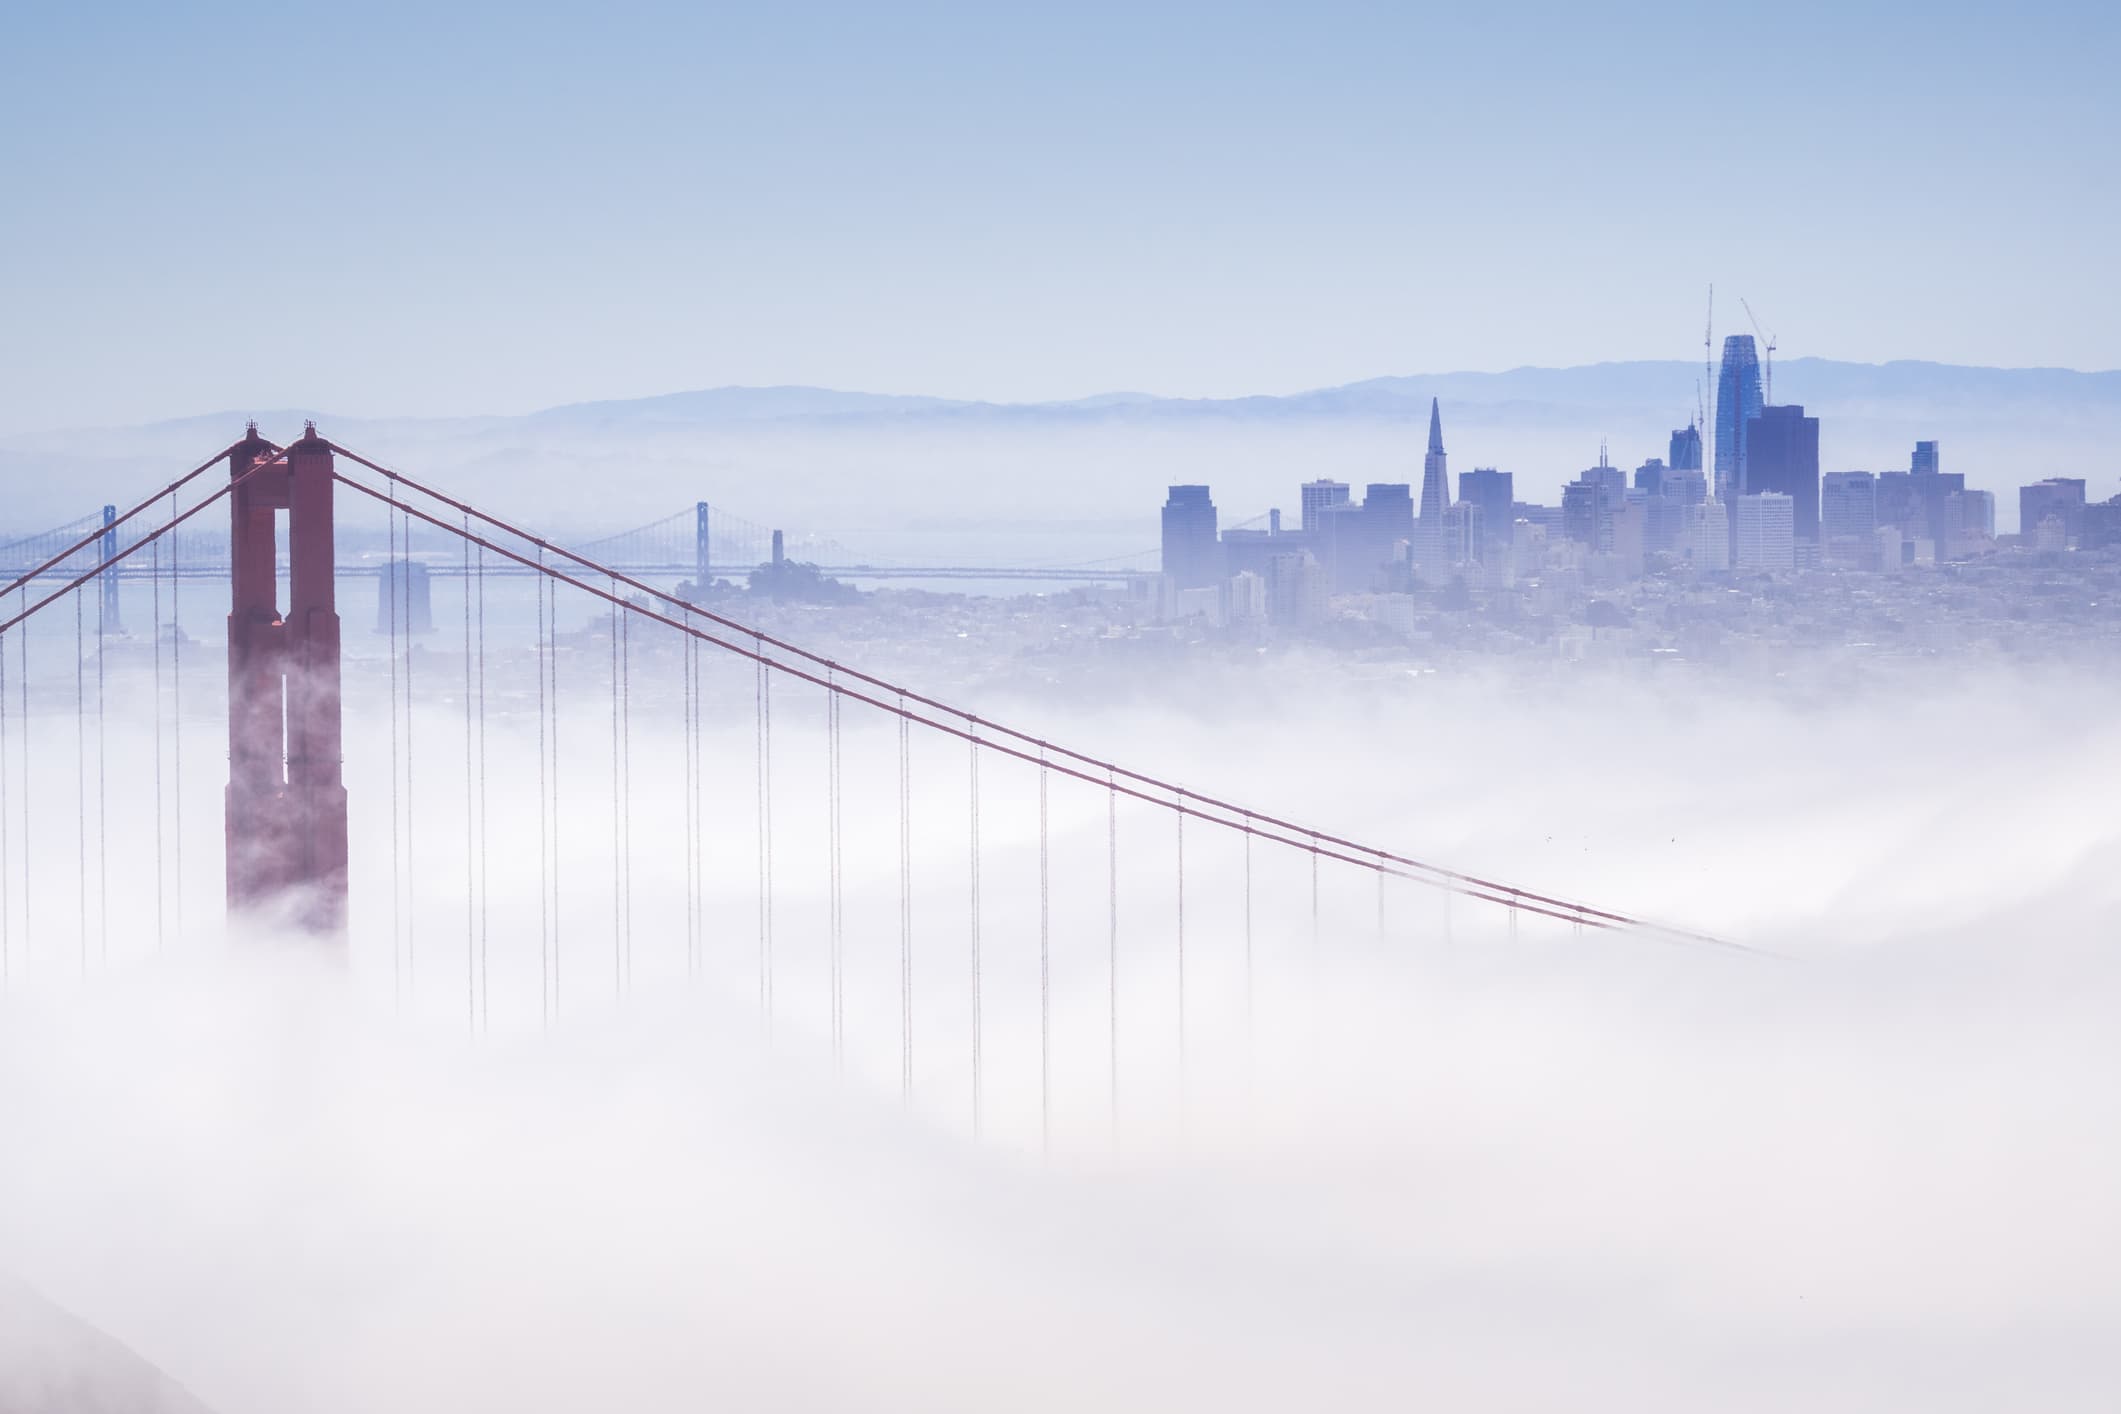 A view of San Francisco shrouded in fog